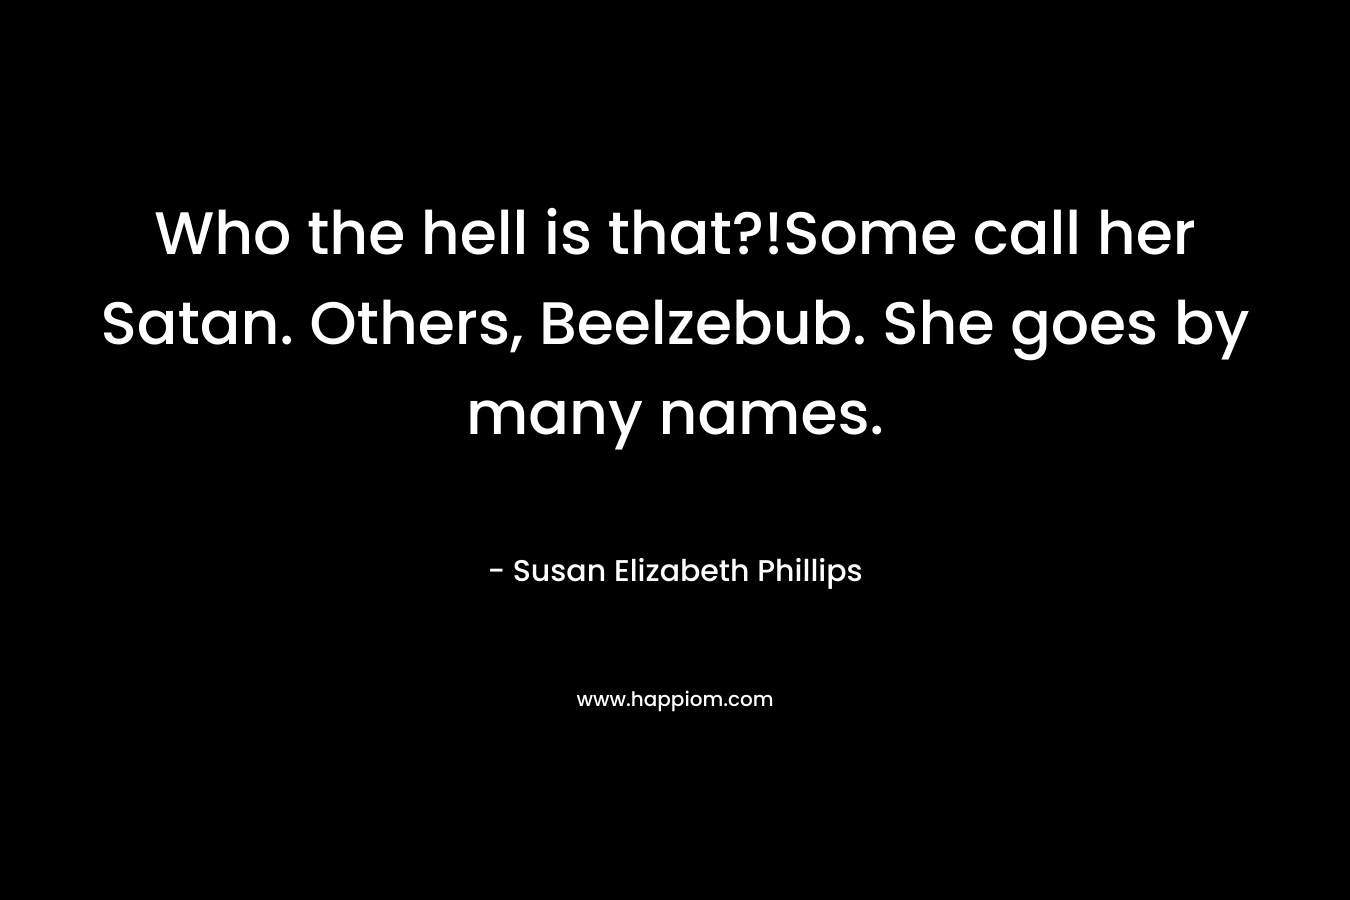 Who the hell is that?!Some call her Satan. Others, Beelzebub. She goes by many names. – Susan Elizabeth Phillips